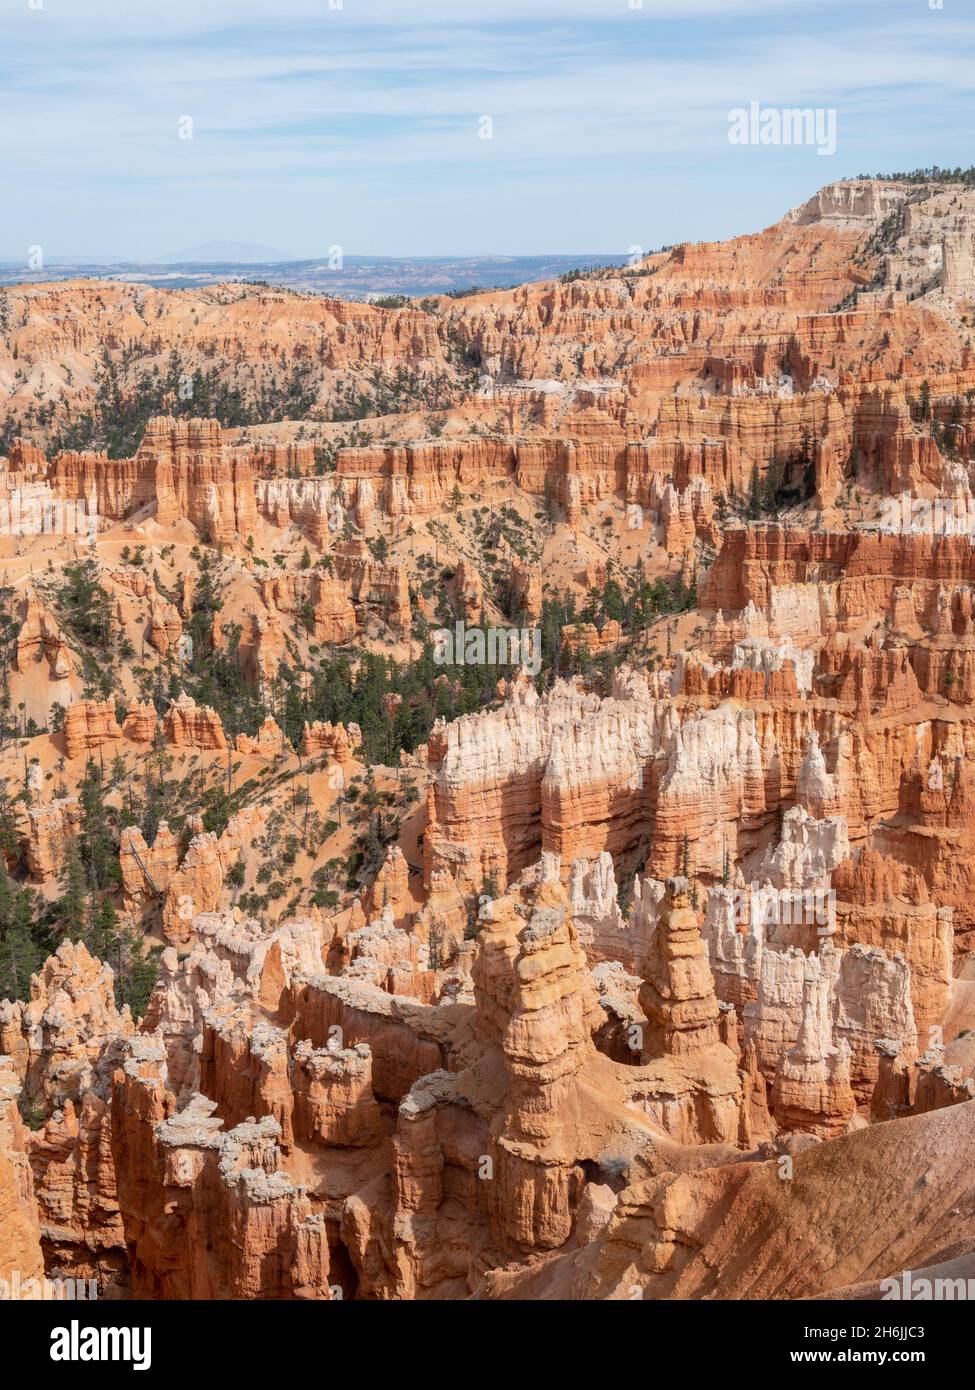 A view of the Bryce amphitheater from the rim at Bryce Canyon National Park, Utah, United States of America, North America Stock Photo